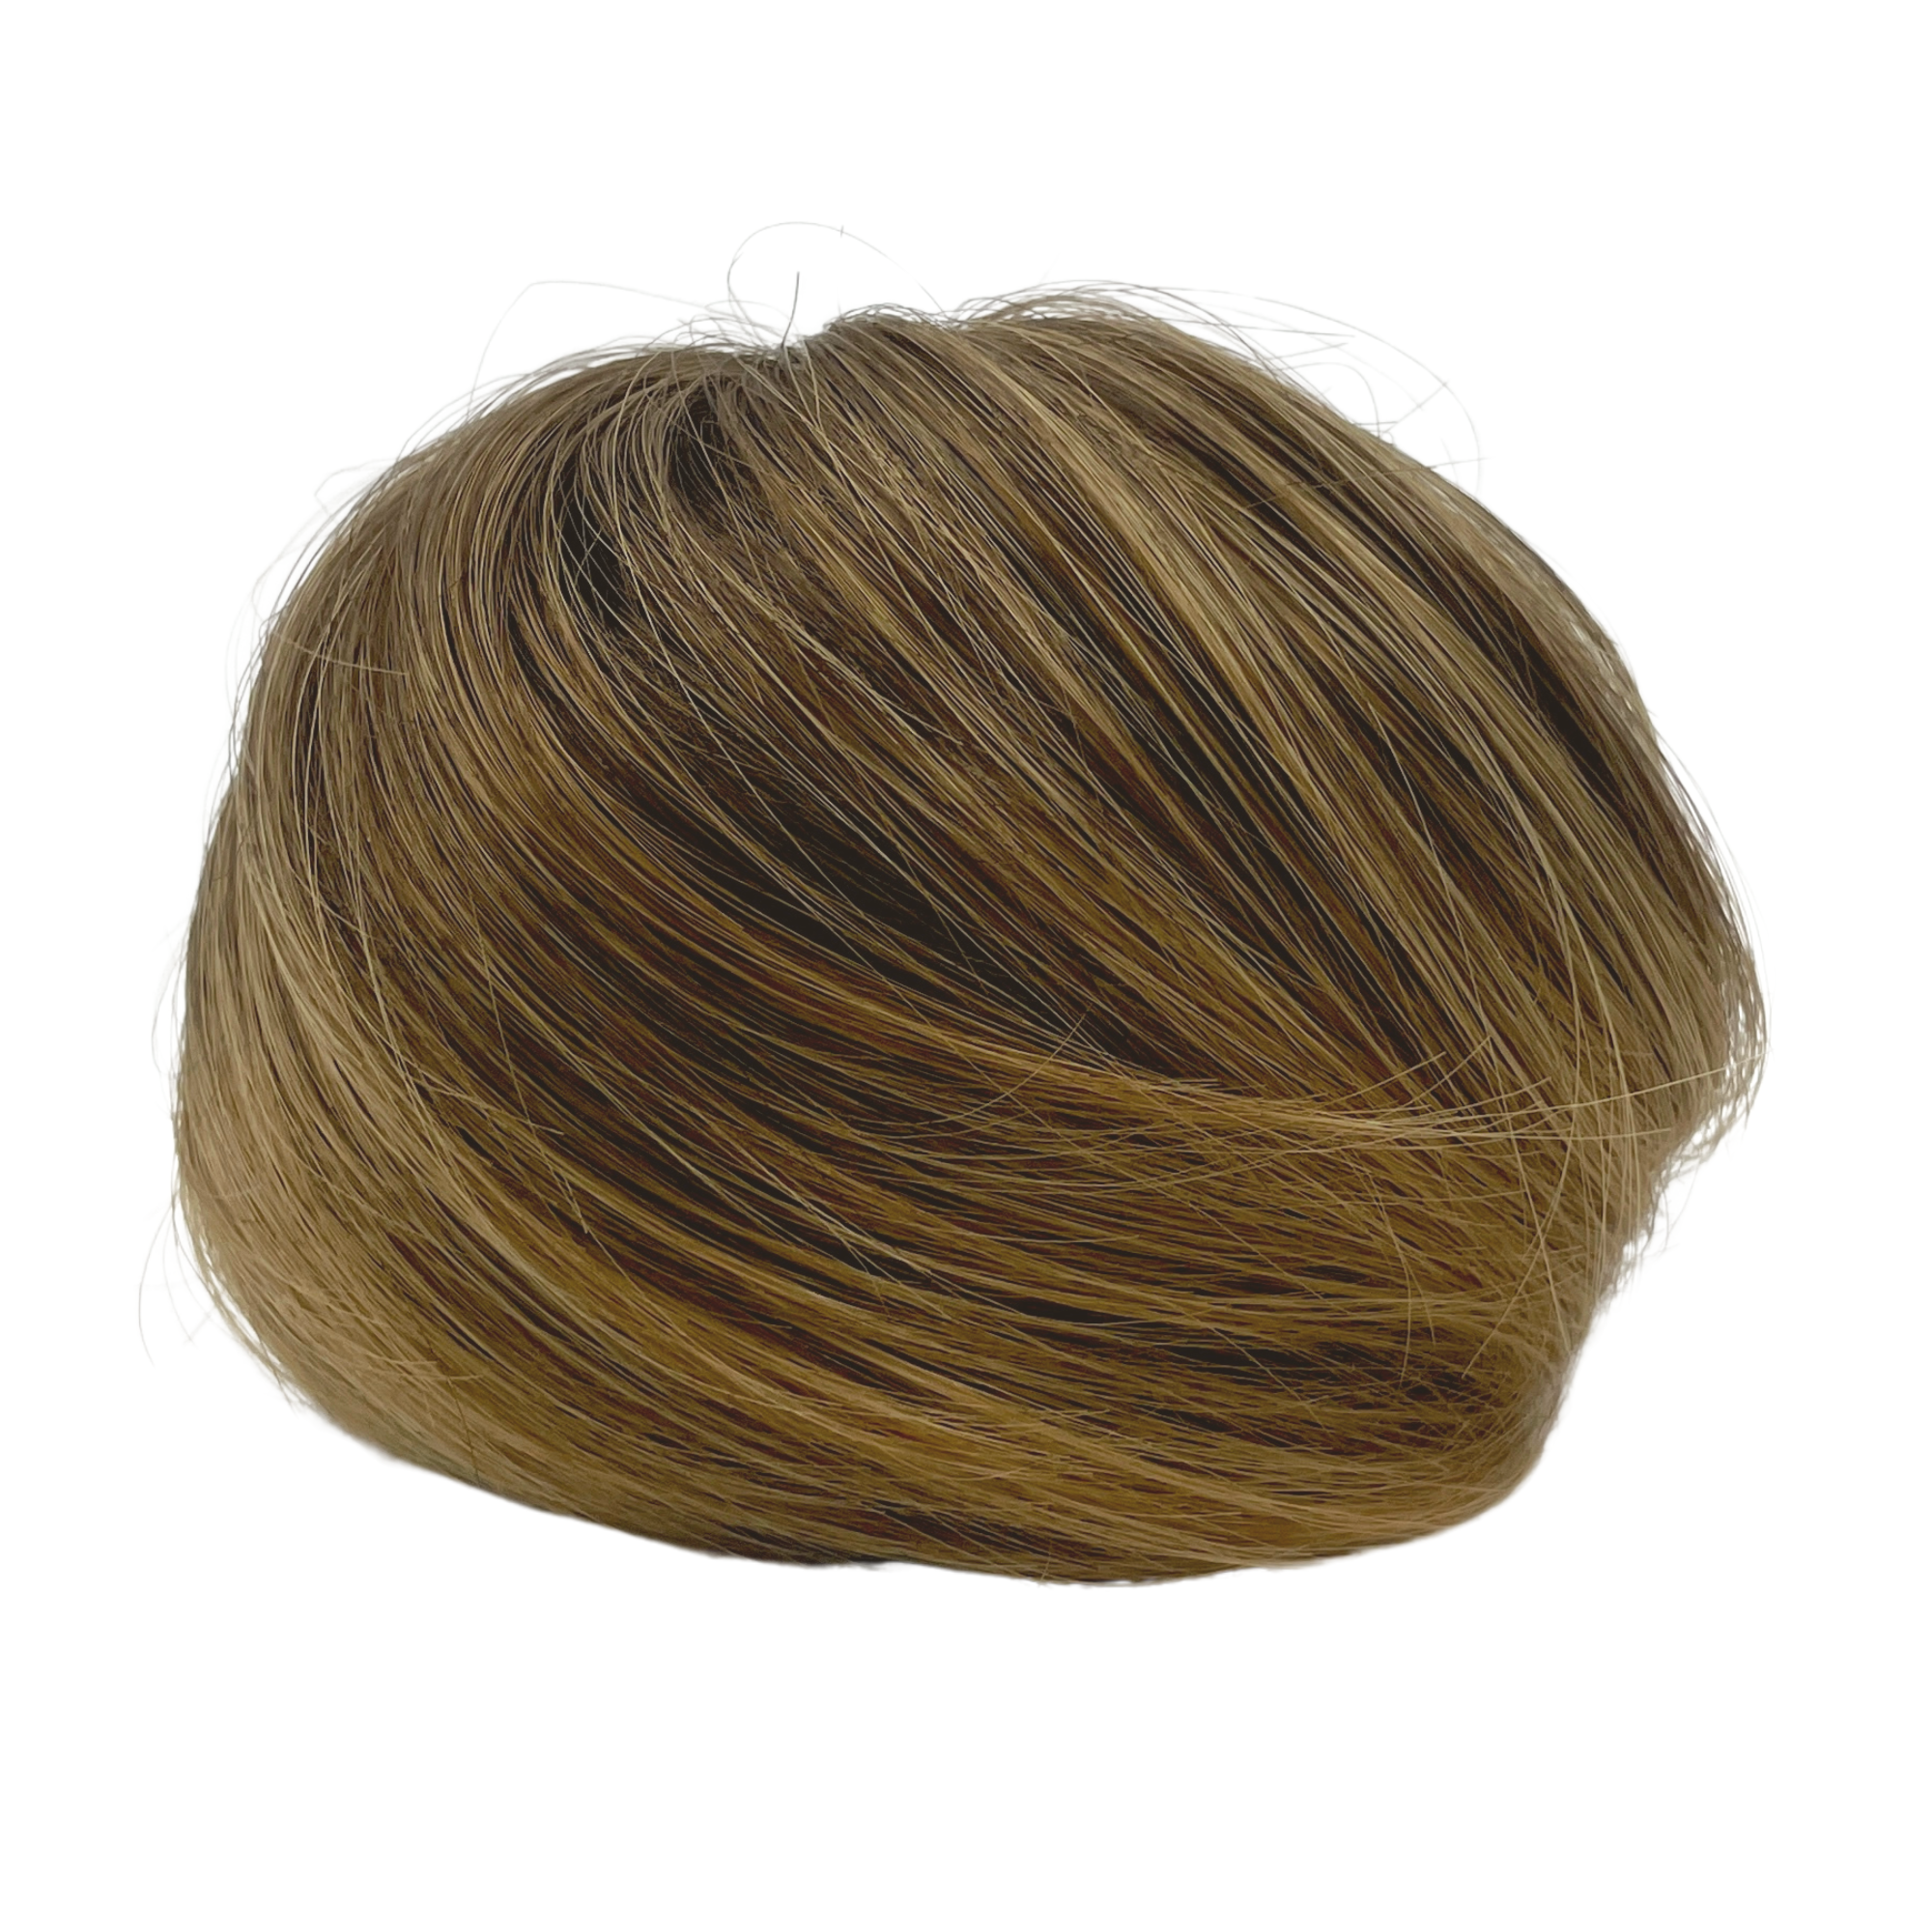 image of hair rehab london clip on bun hairpiece in shade candlelit brunette